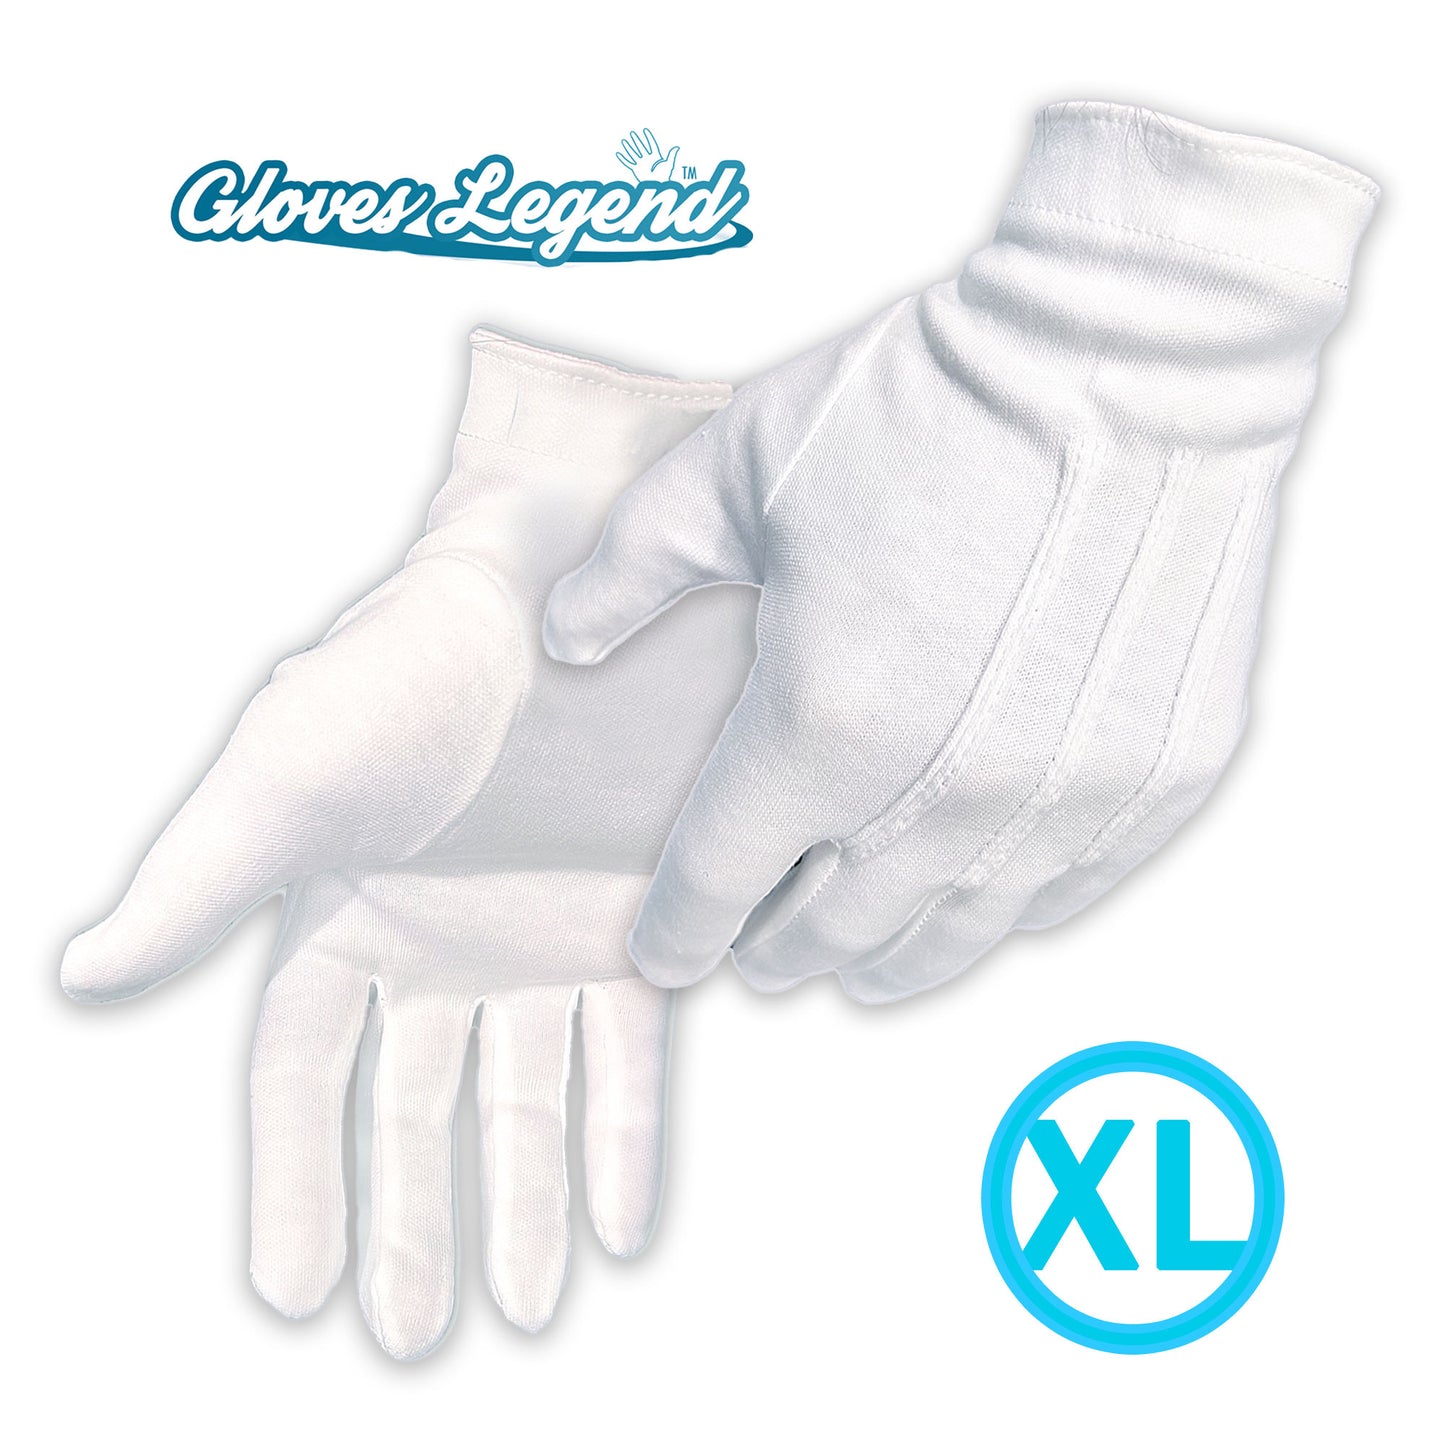 1 Pairs (2 Gloves) Size Extra Large - Gloves Legend 100% White Cotton Marching Parade Formal Dress Gloves